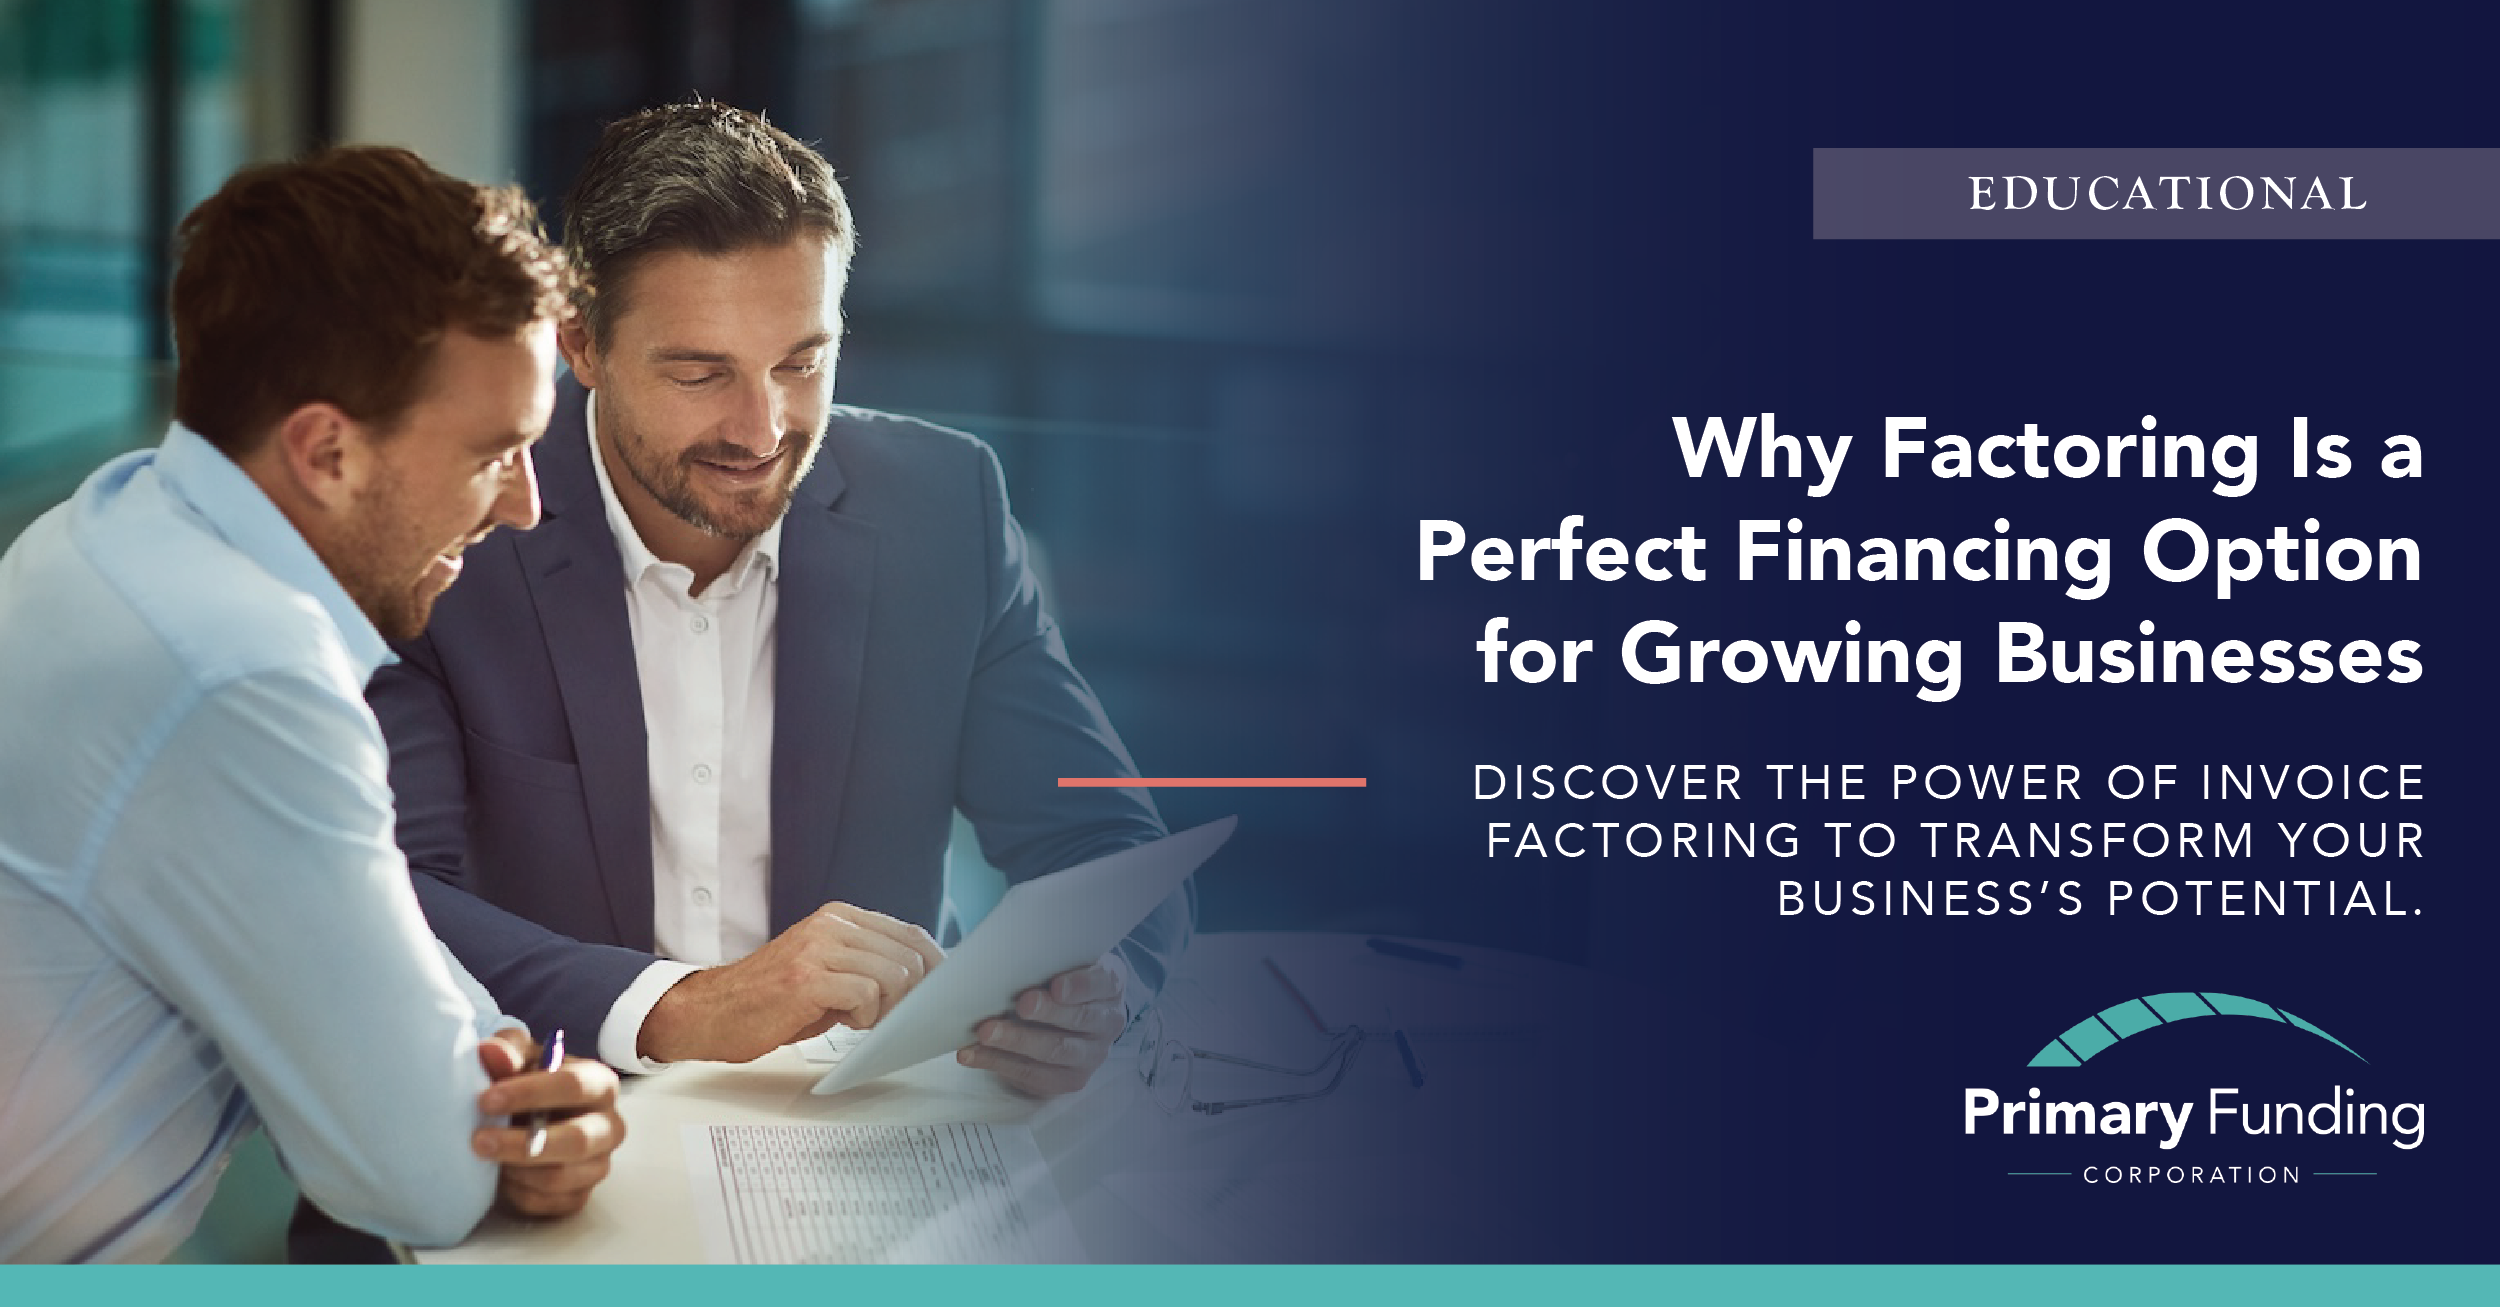 Why Factoring Is a Perfect Financing Option for Growing Businesses